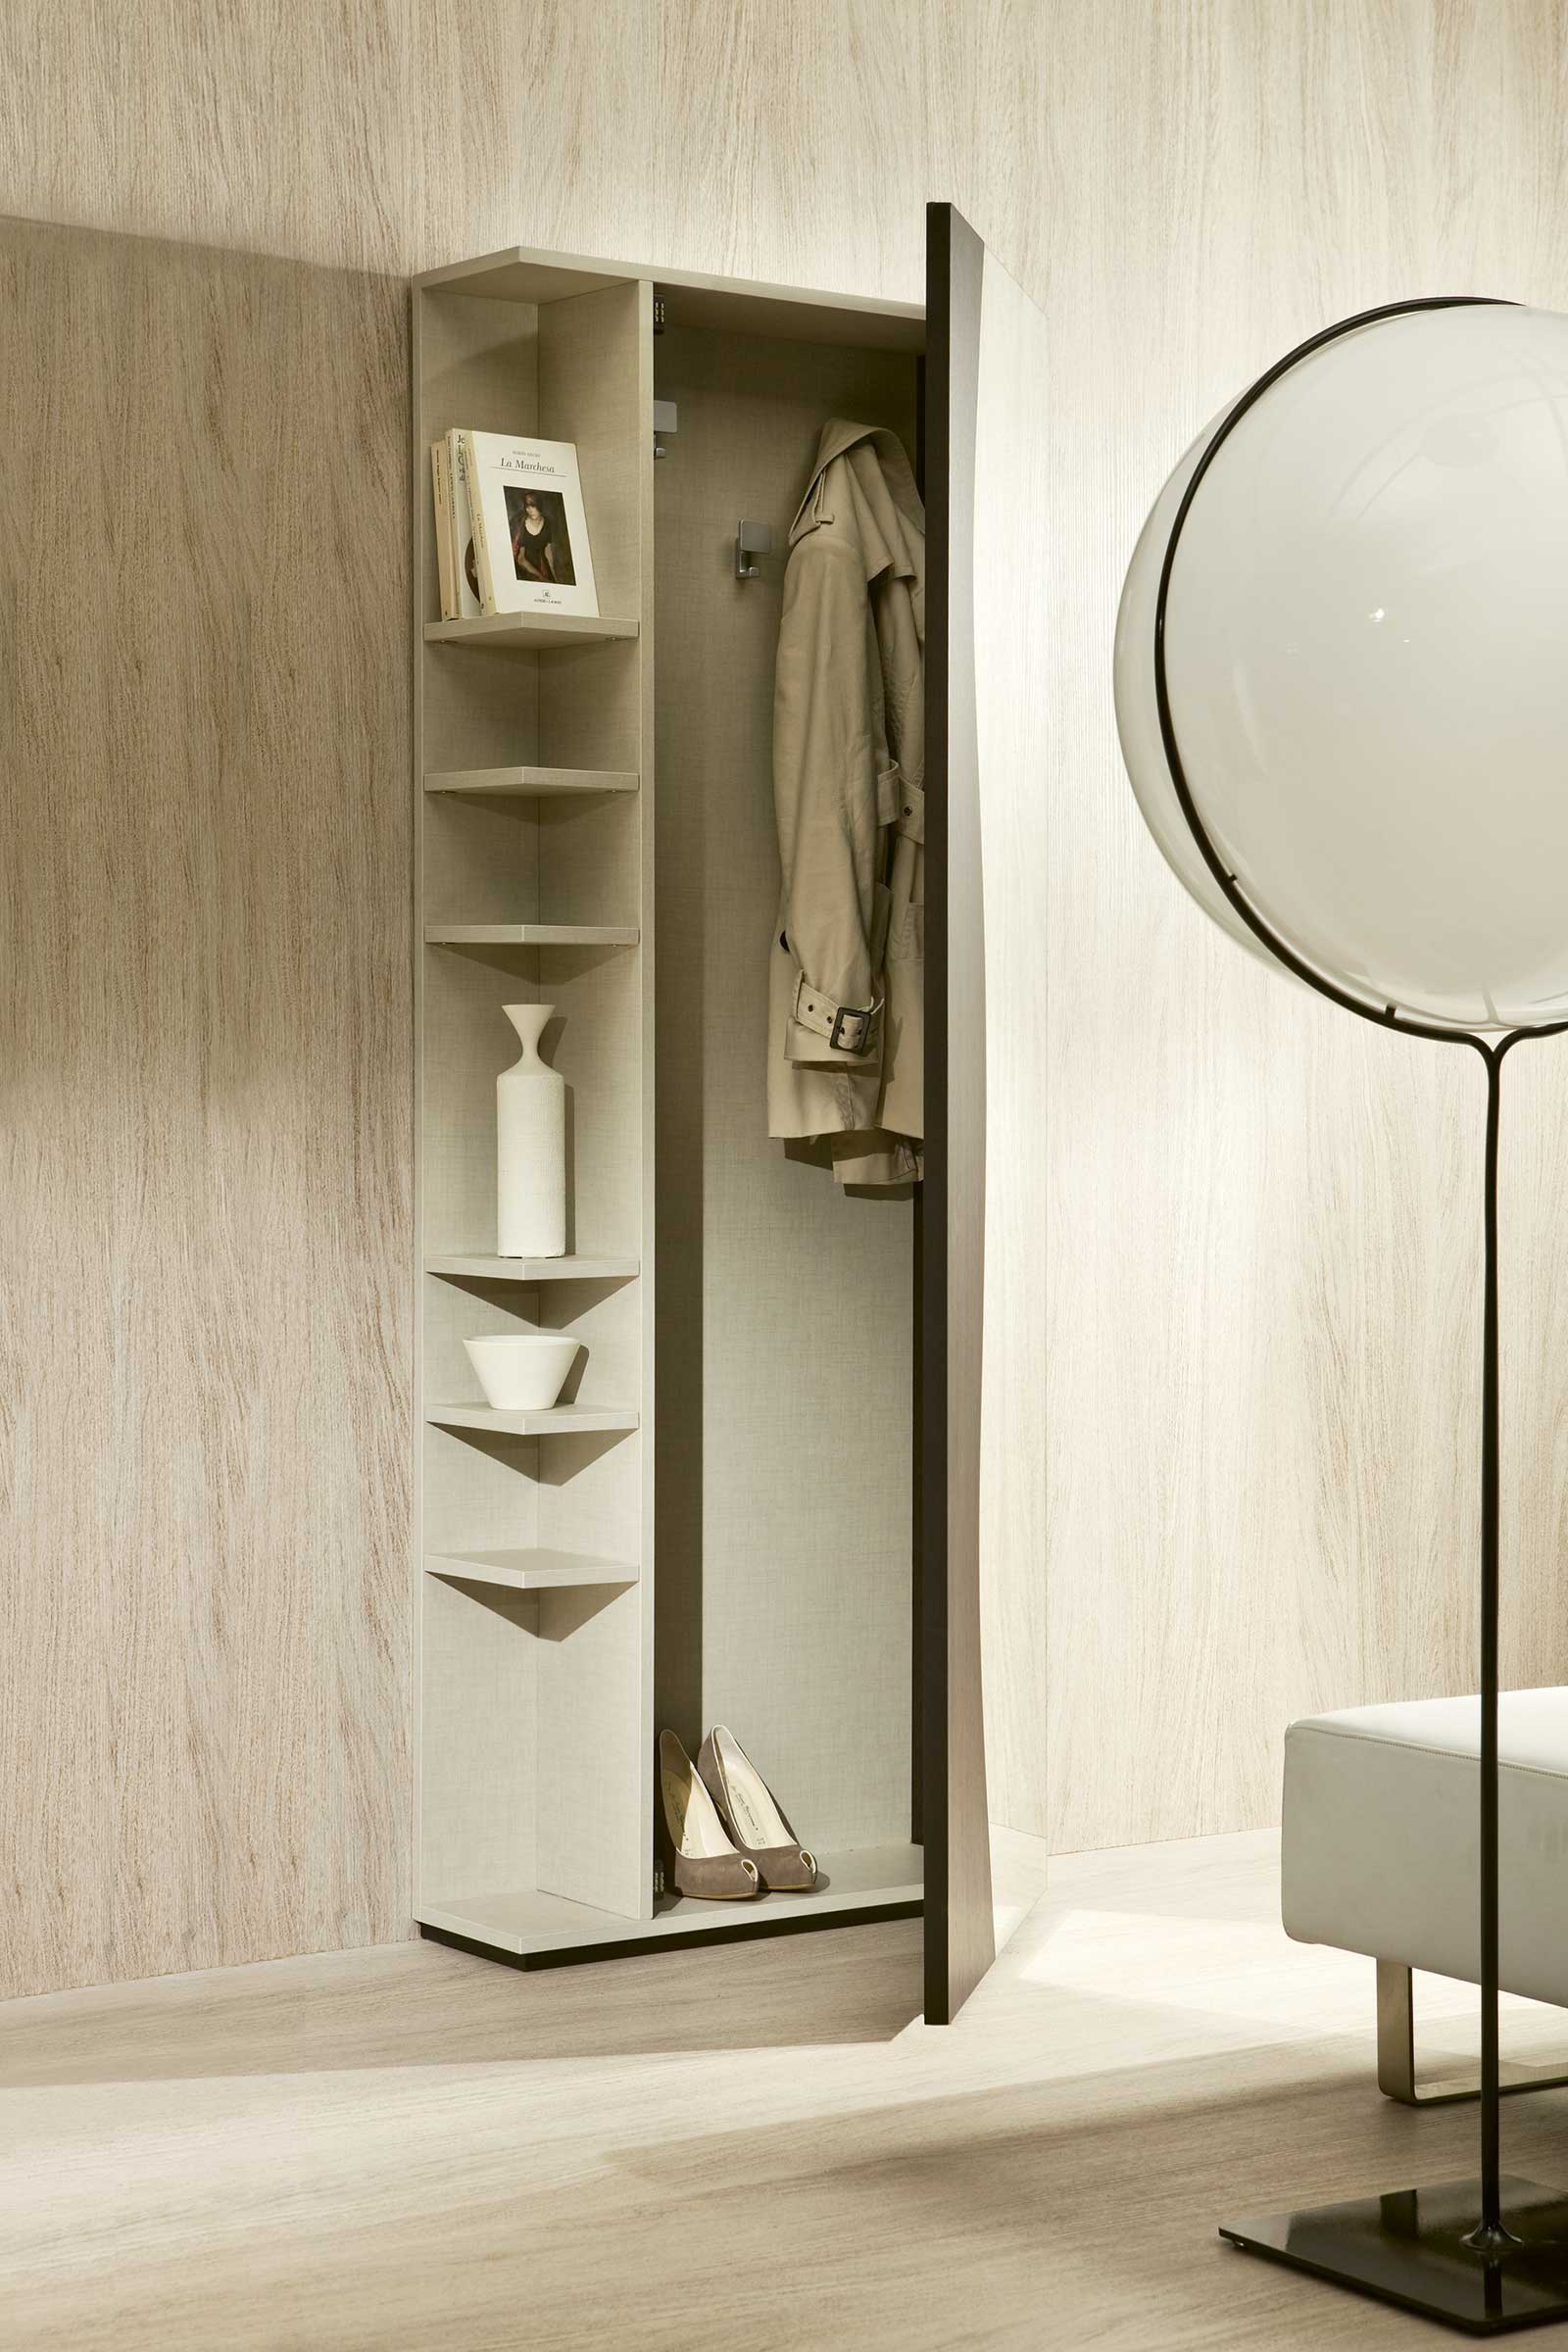 FUTUR is an entrance unit in wengé with a coat rack as well as a mirror with side compartments designed by Studio CONTRODESIGN.